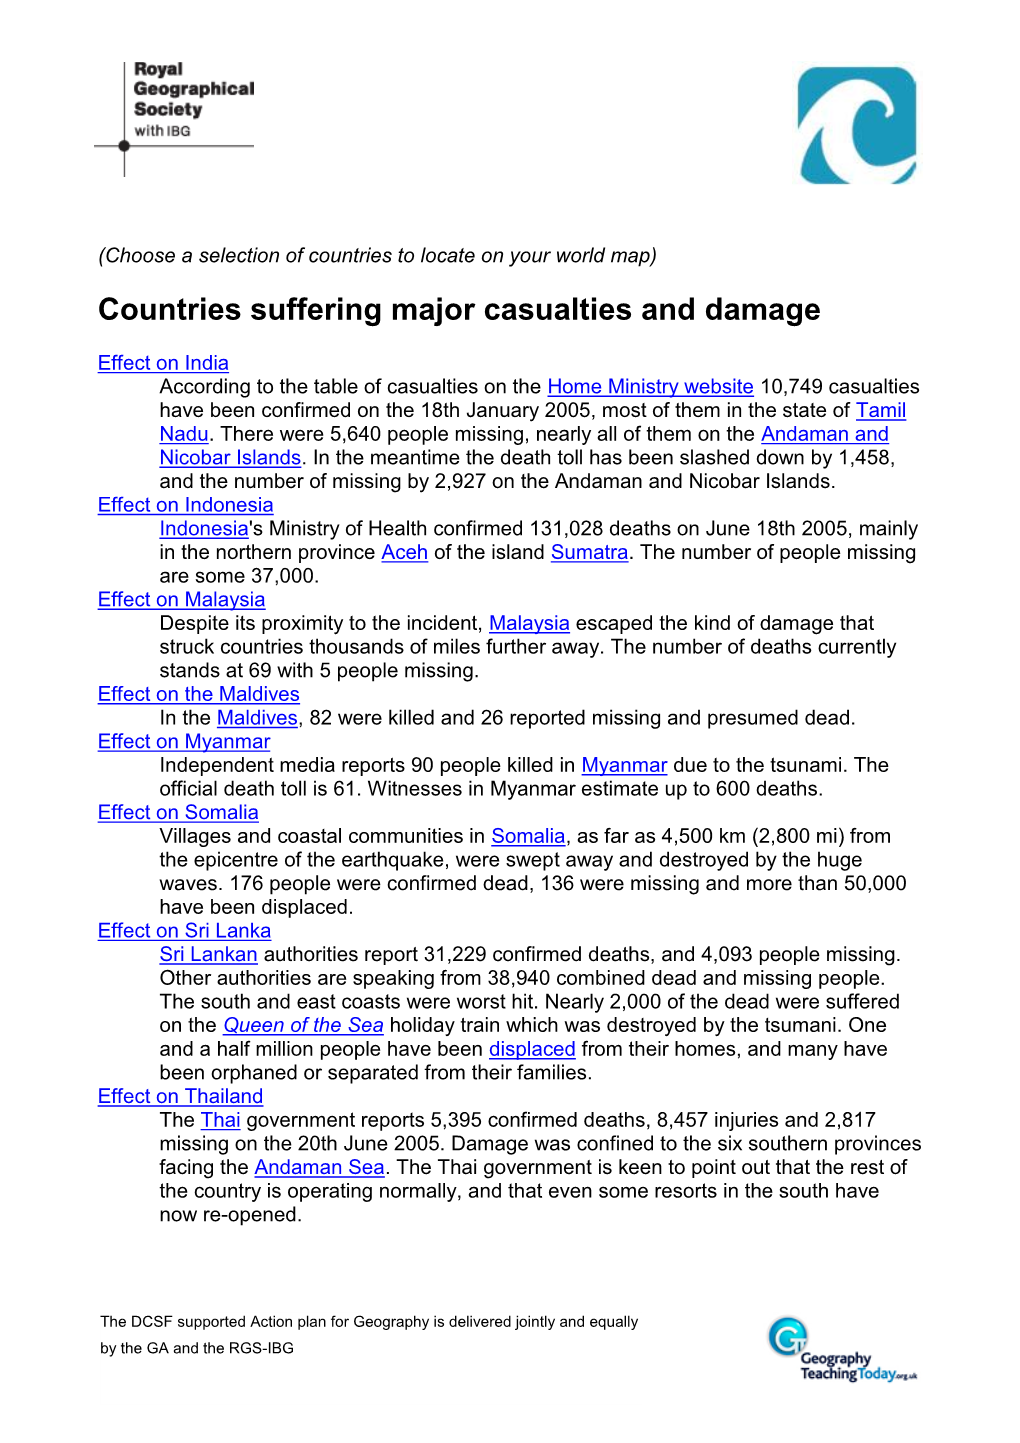 Countries Suffering Major Casualties and Damage